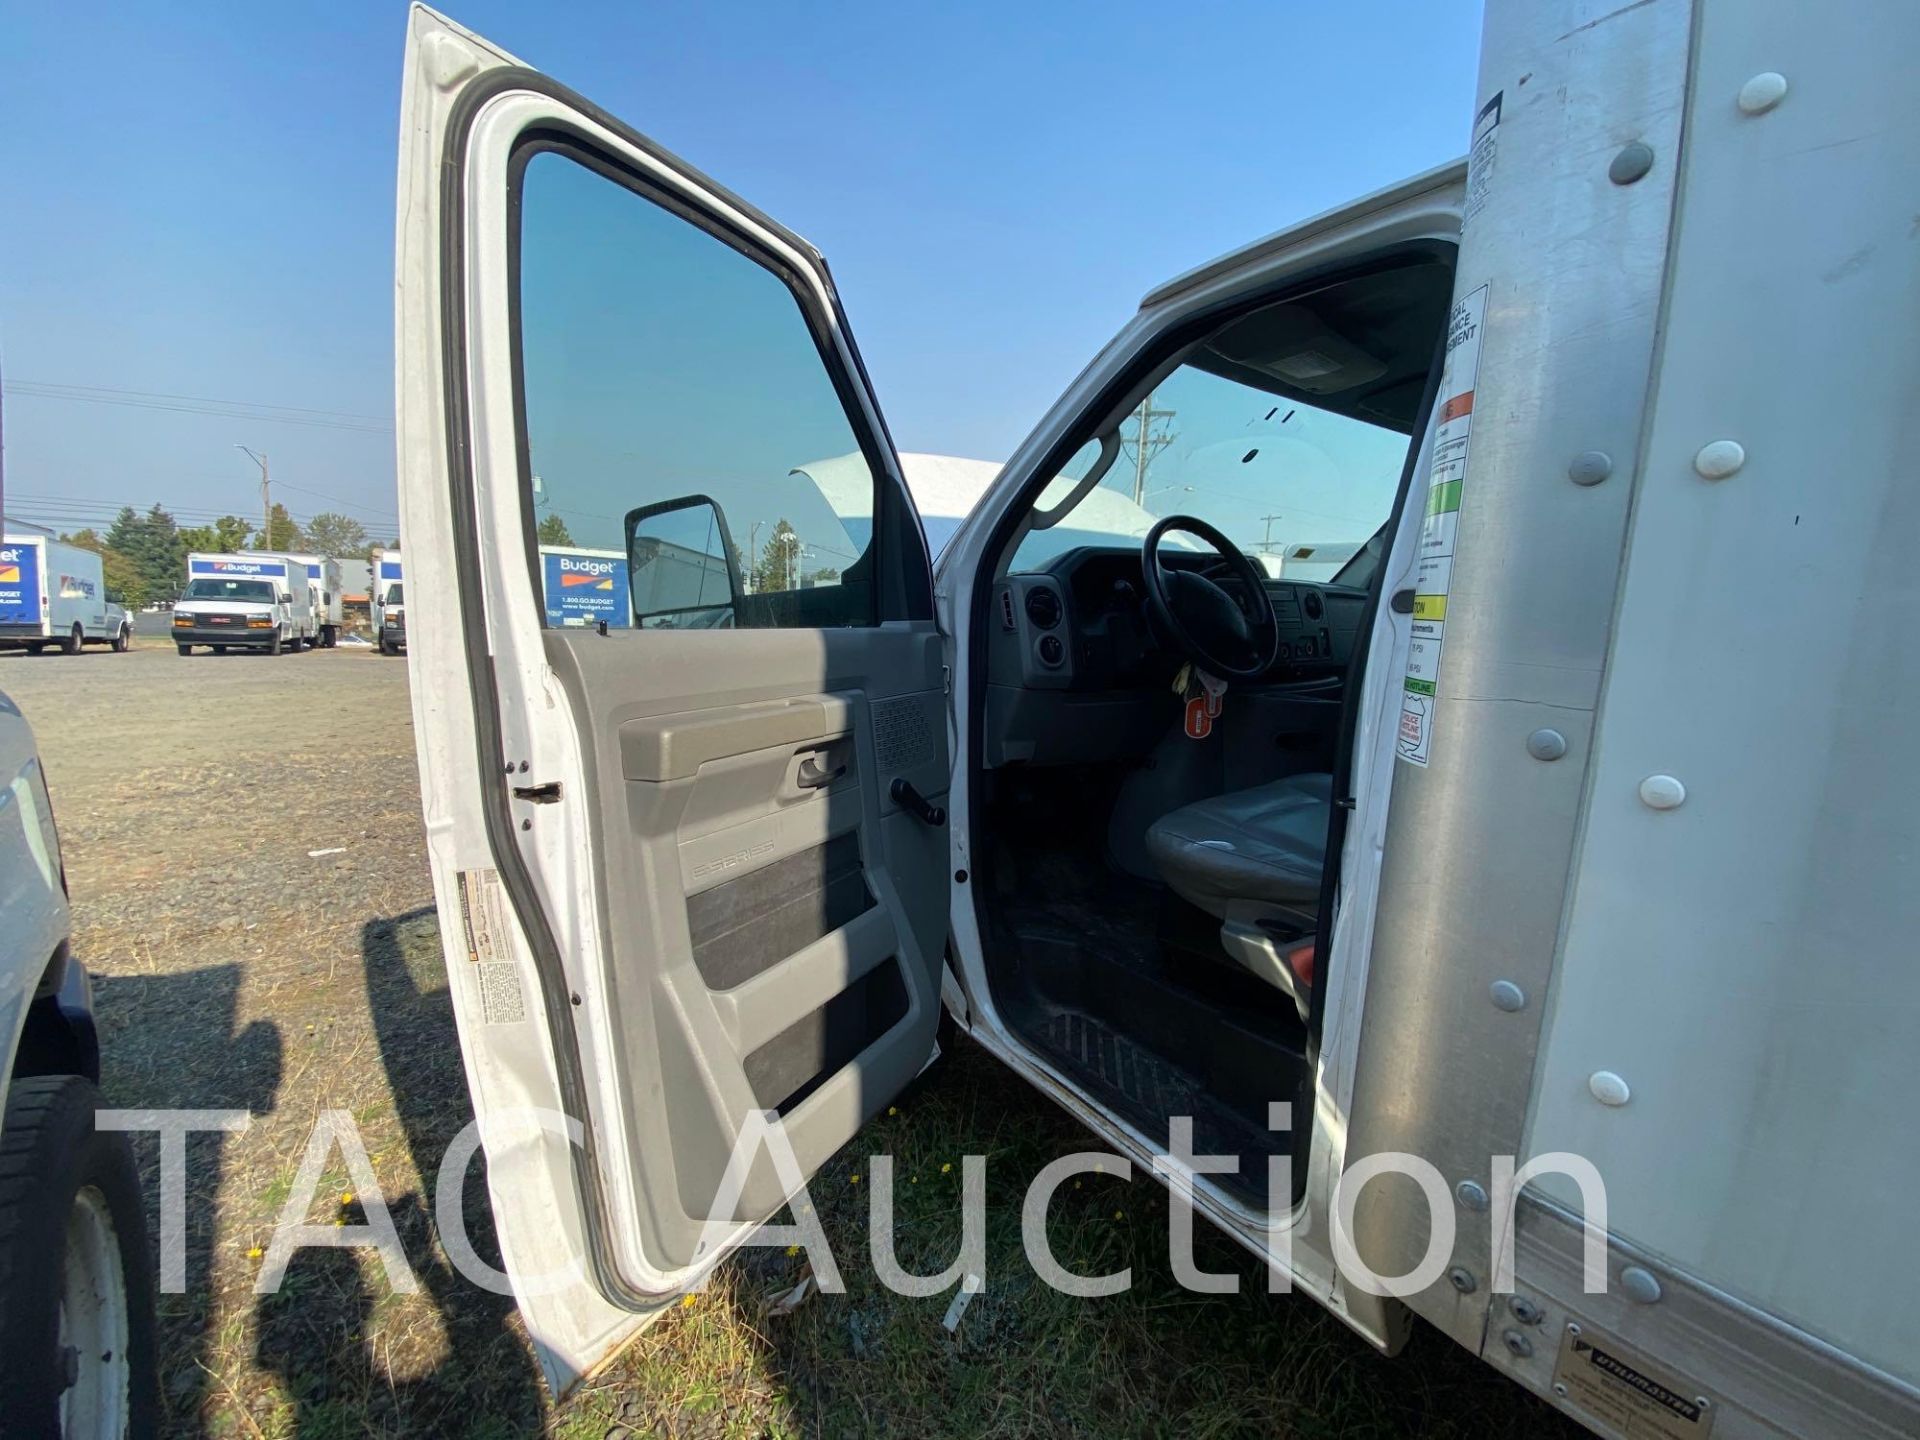 2015 Ford E-350 16ft Box Truck - Image 36 of 106